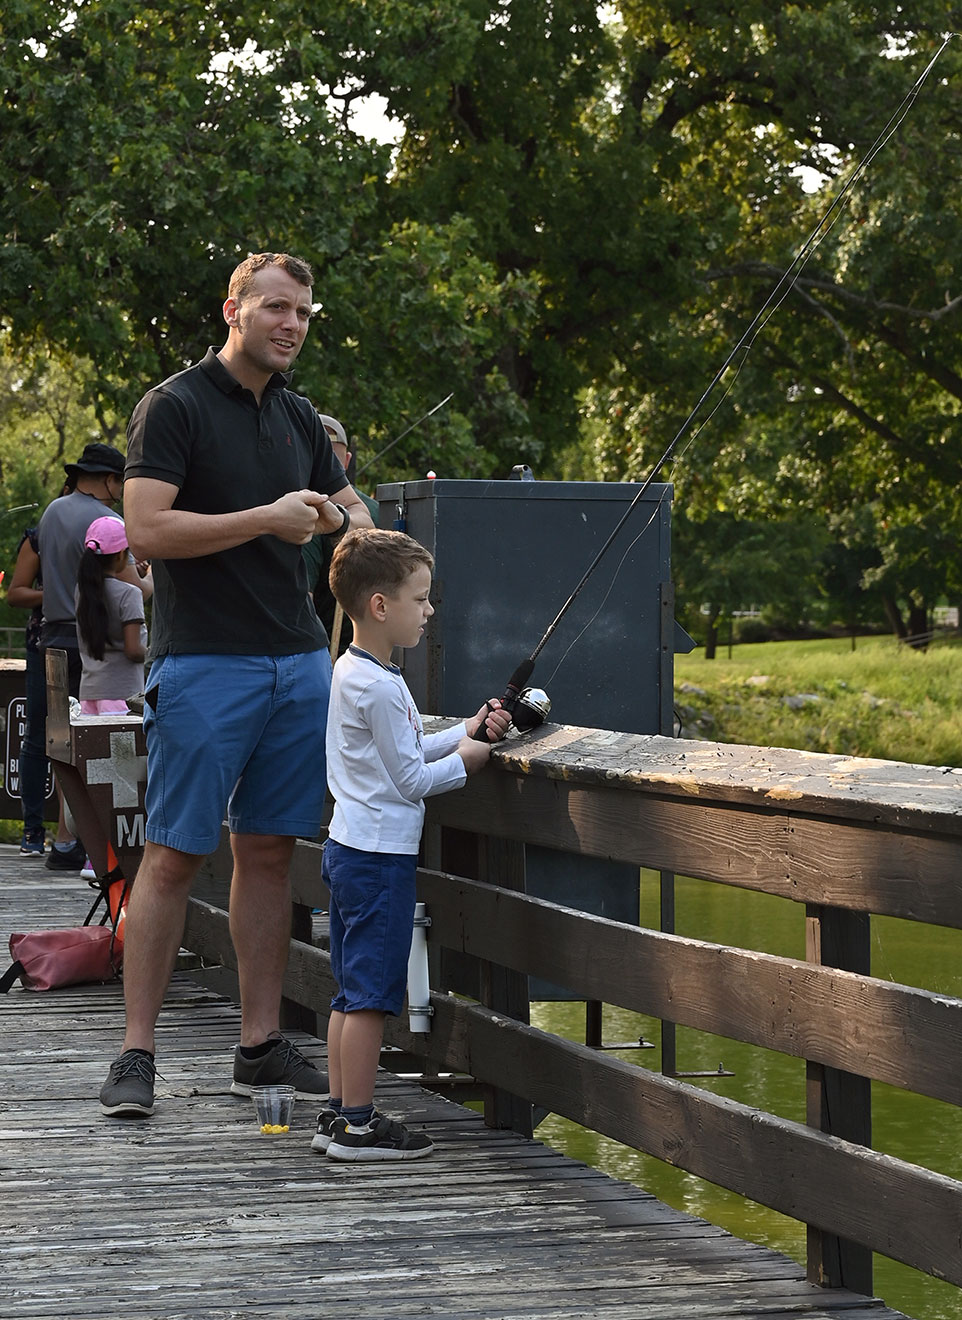 Maj. Gaetano Robustelli and his 6-year-old son Leonardo fish off the dock at Merritt Lake, Fort Leavenworth during the International Family Fishing Derby on Sept. 11. Robustelli is an international military student from Italy enrolled in the Command and General Staff Officers Course Class of 2022.